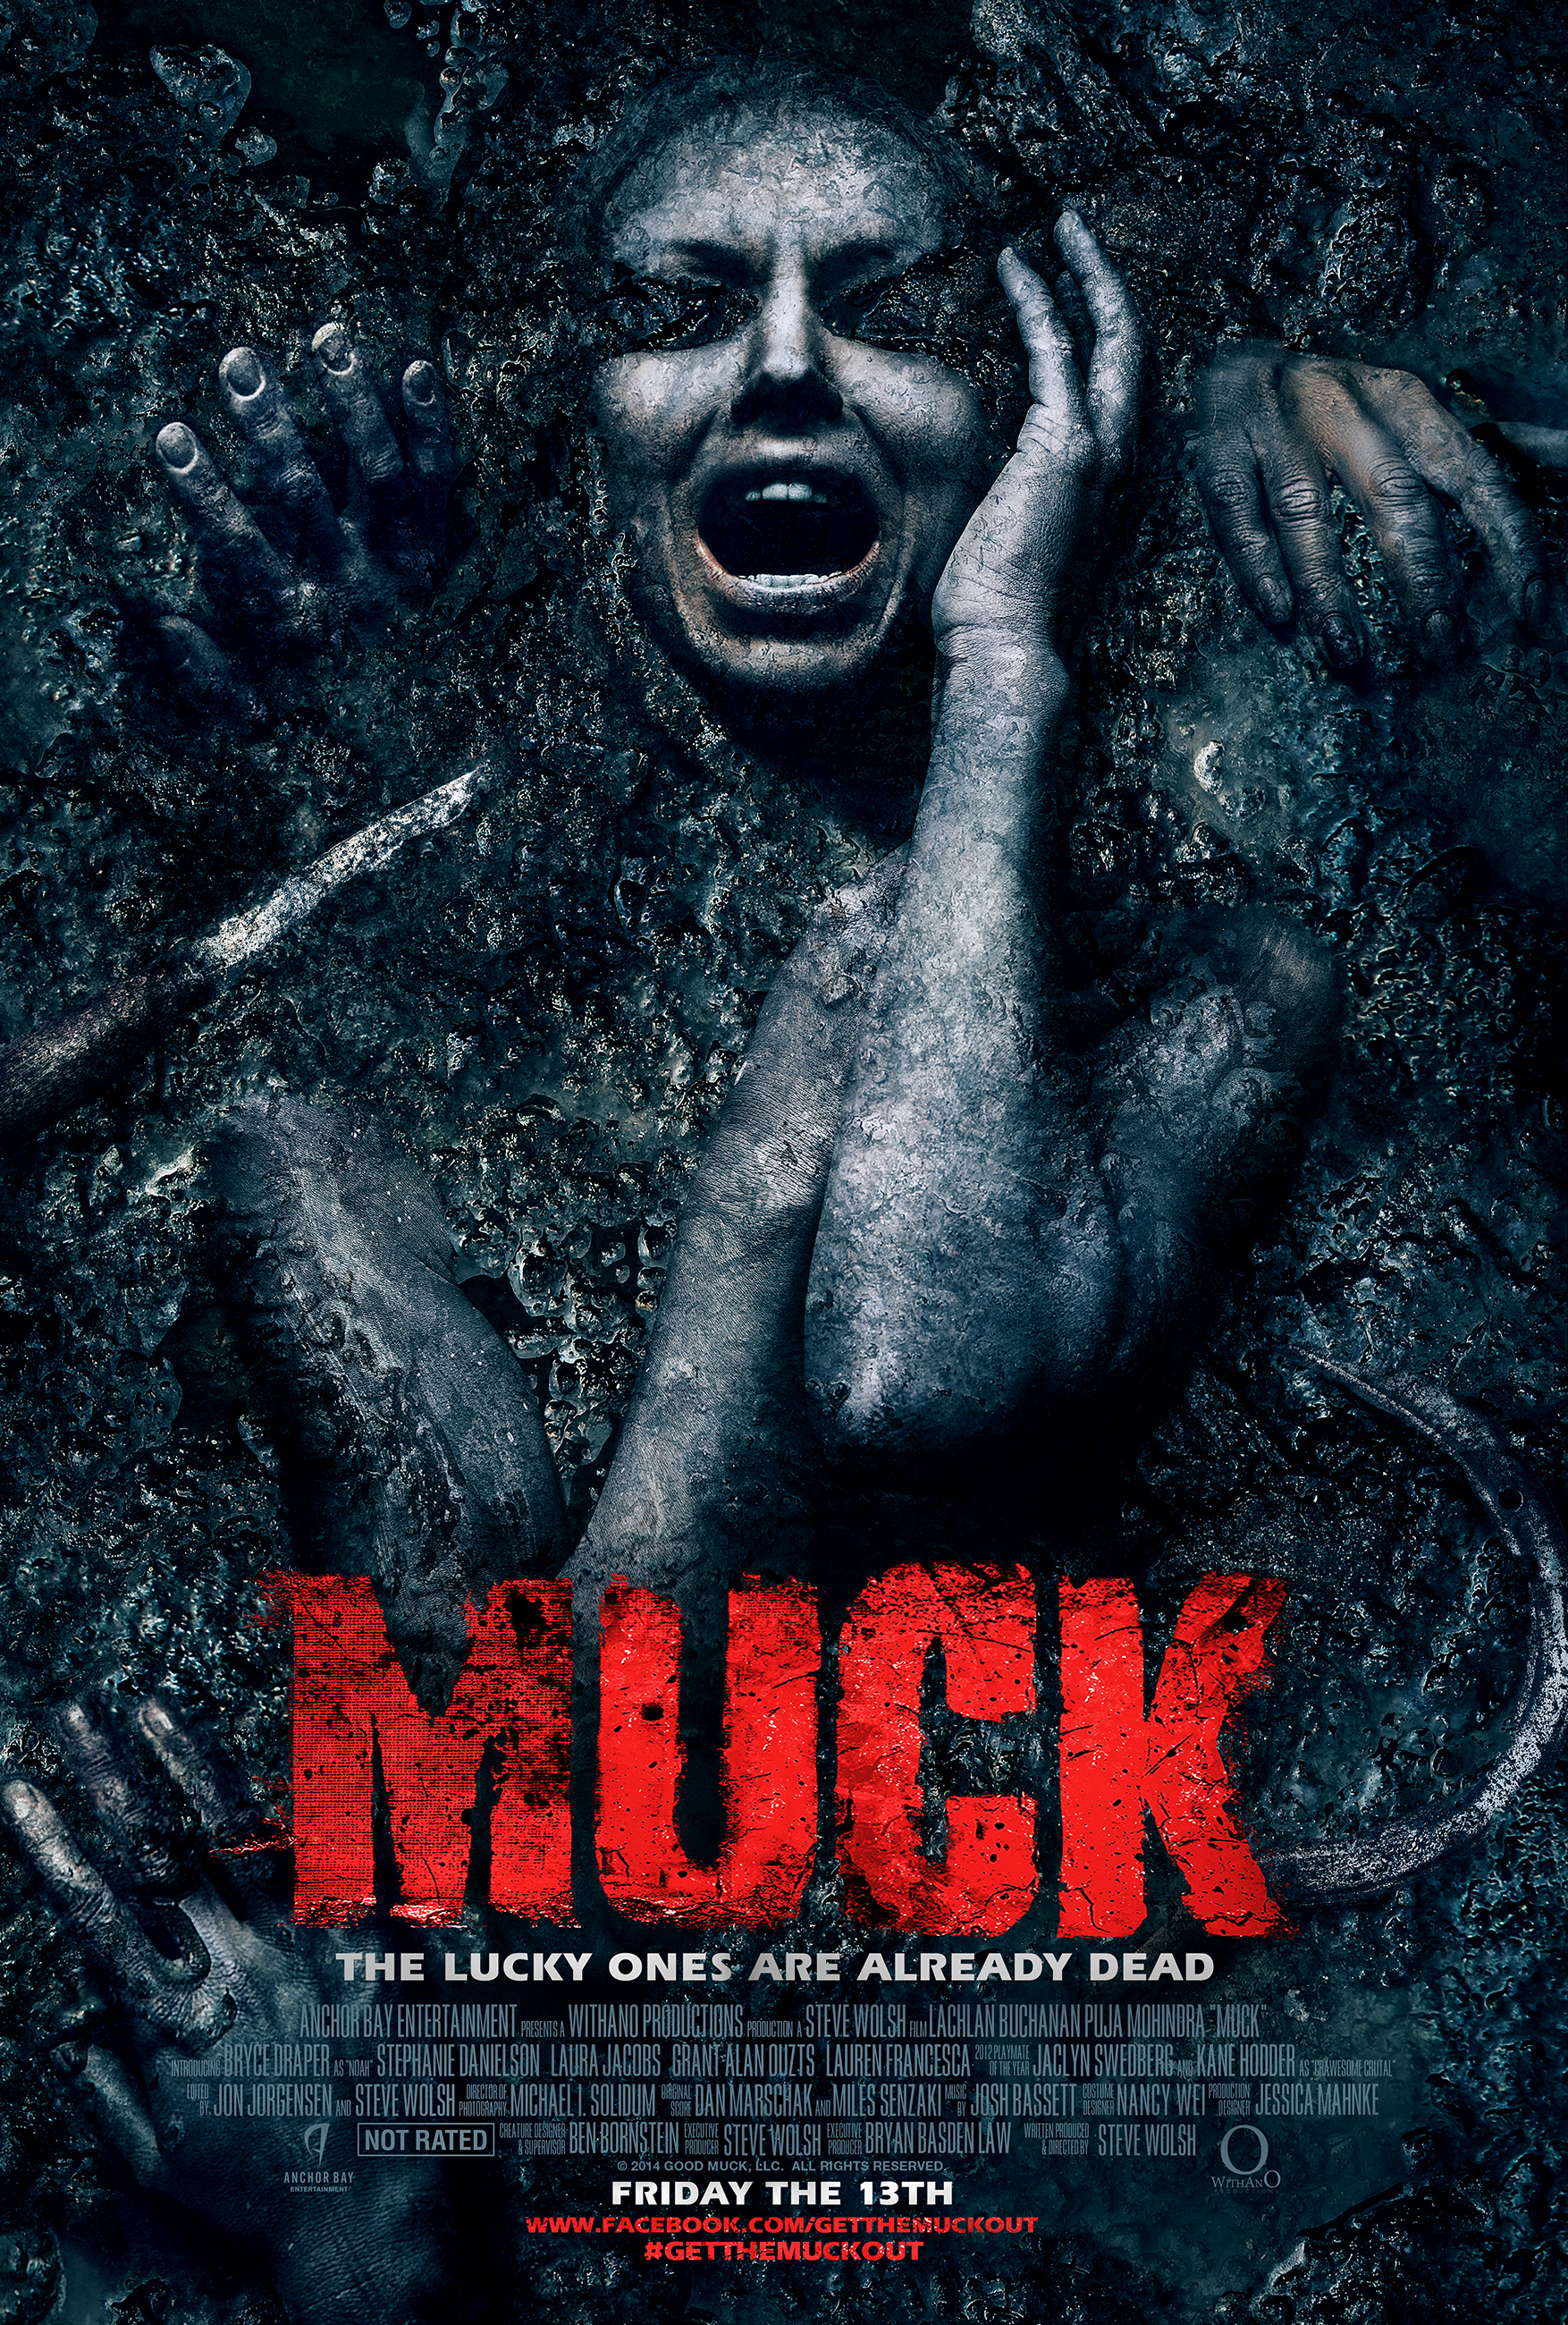 Muck Theatrical Poster